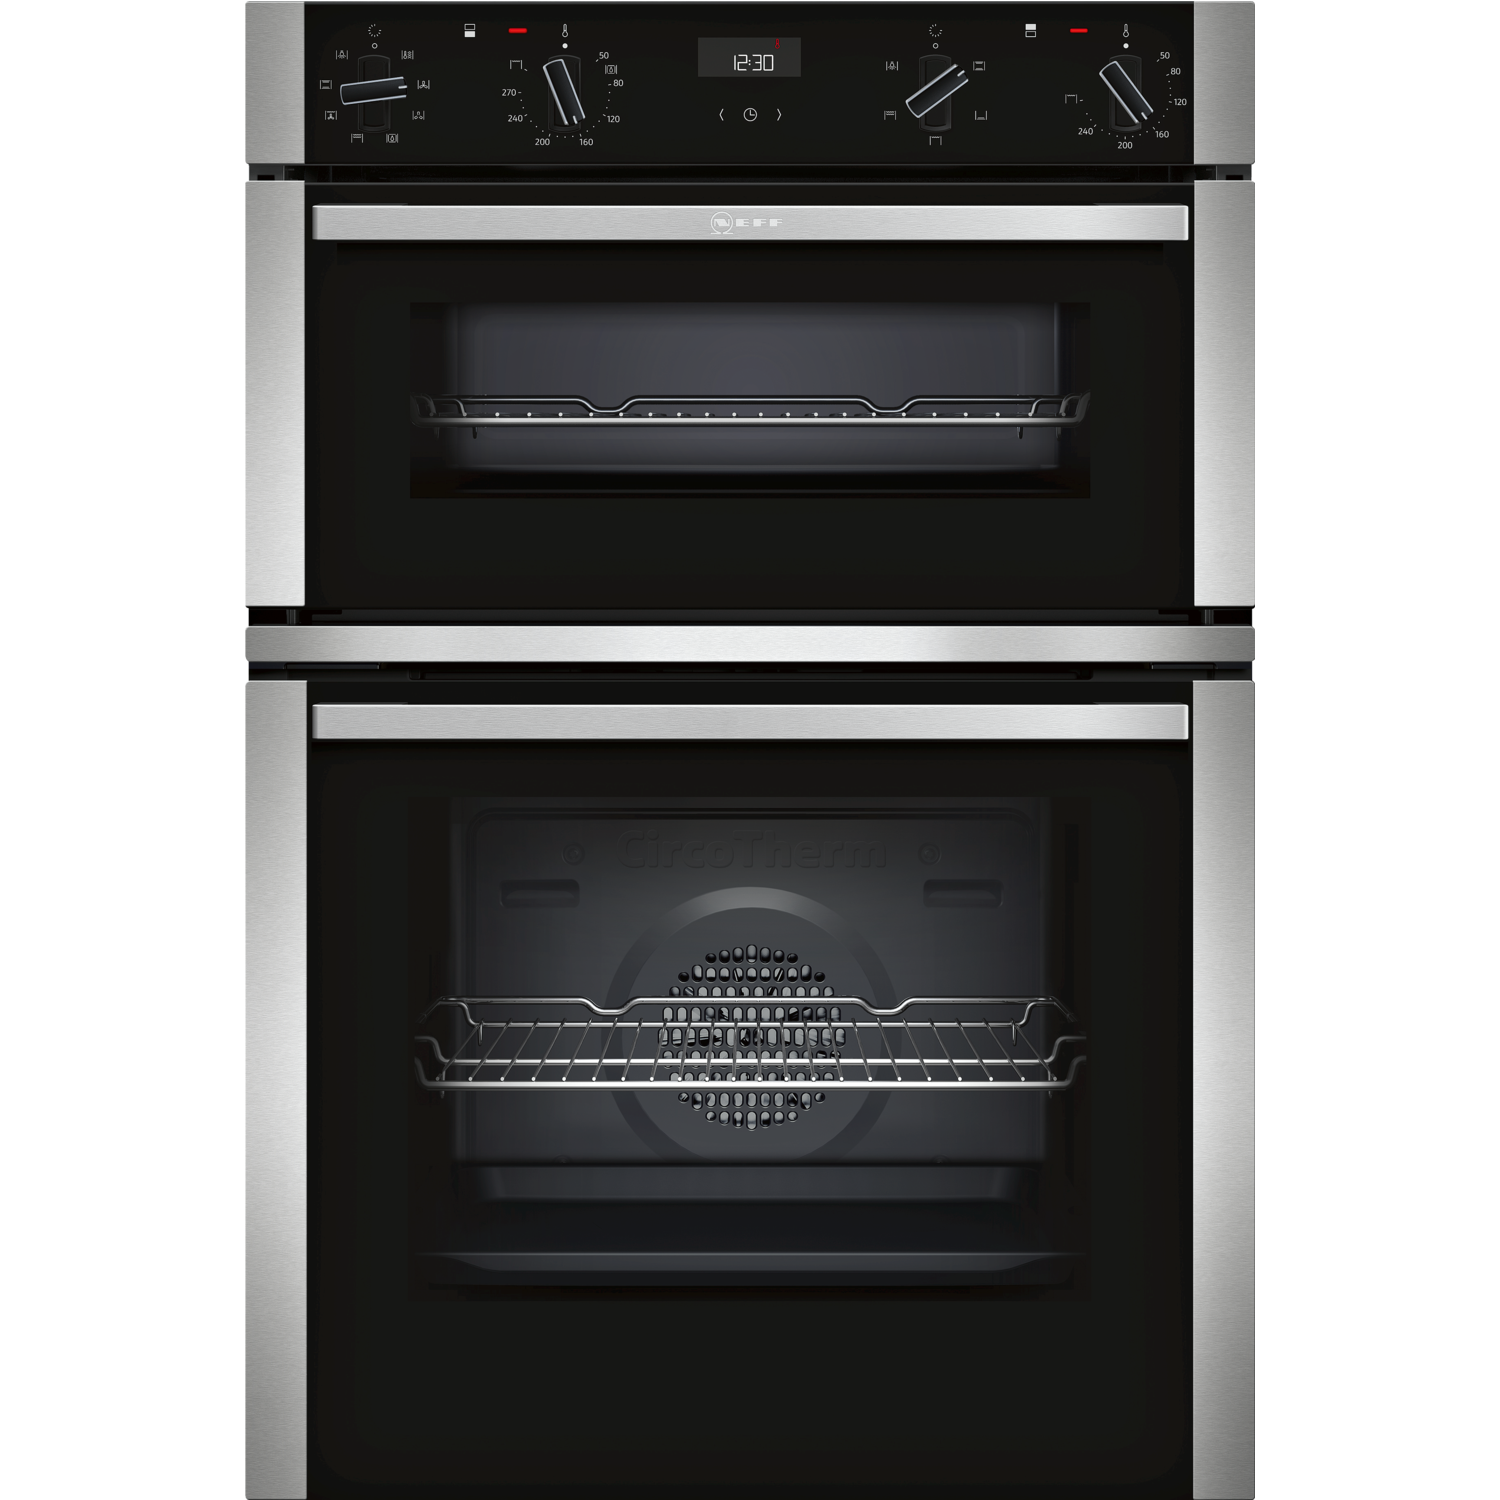 Neff N50 Electric Built In Double Oven - Stainless Steel